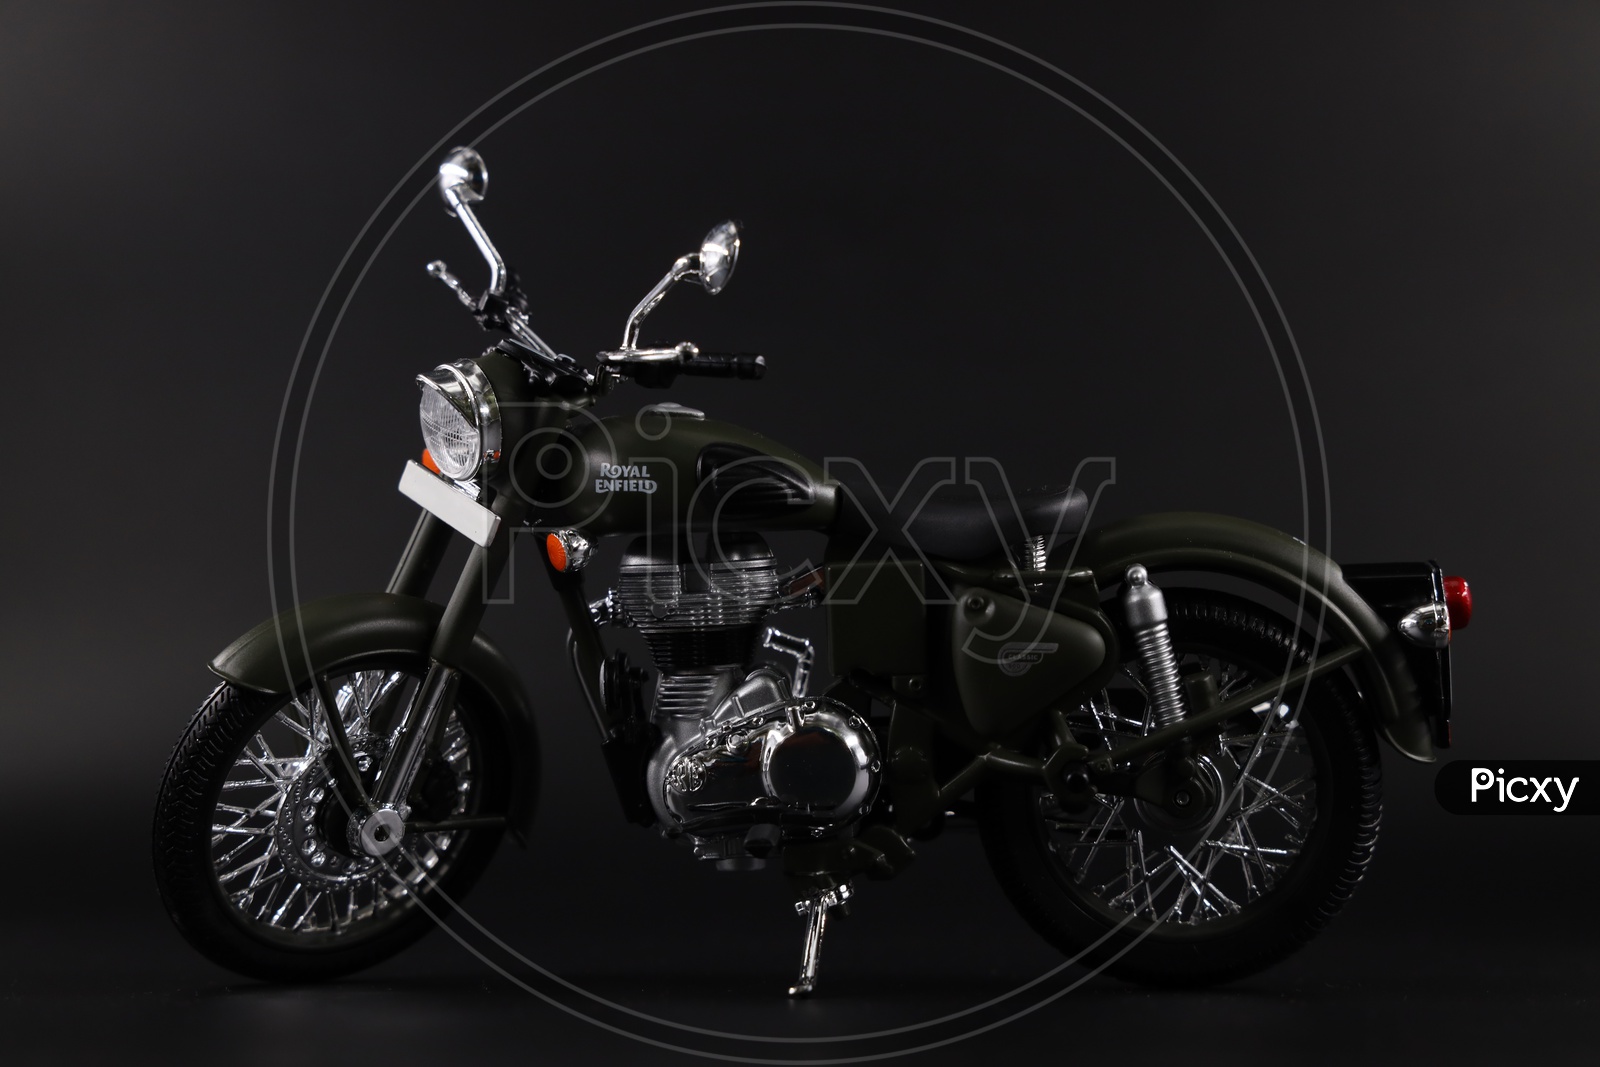 Royal Enfield Bullet Classic 350 Bike Miniature On an Isolated Black Background